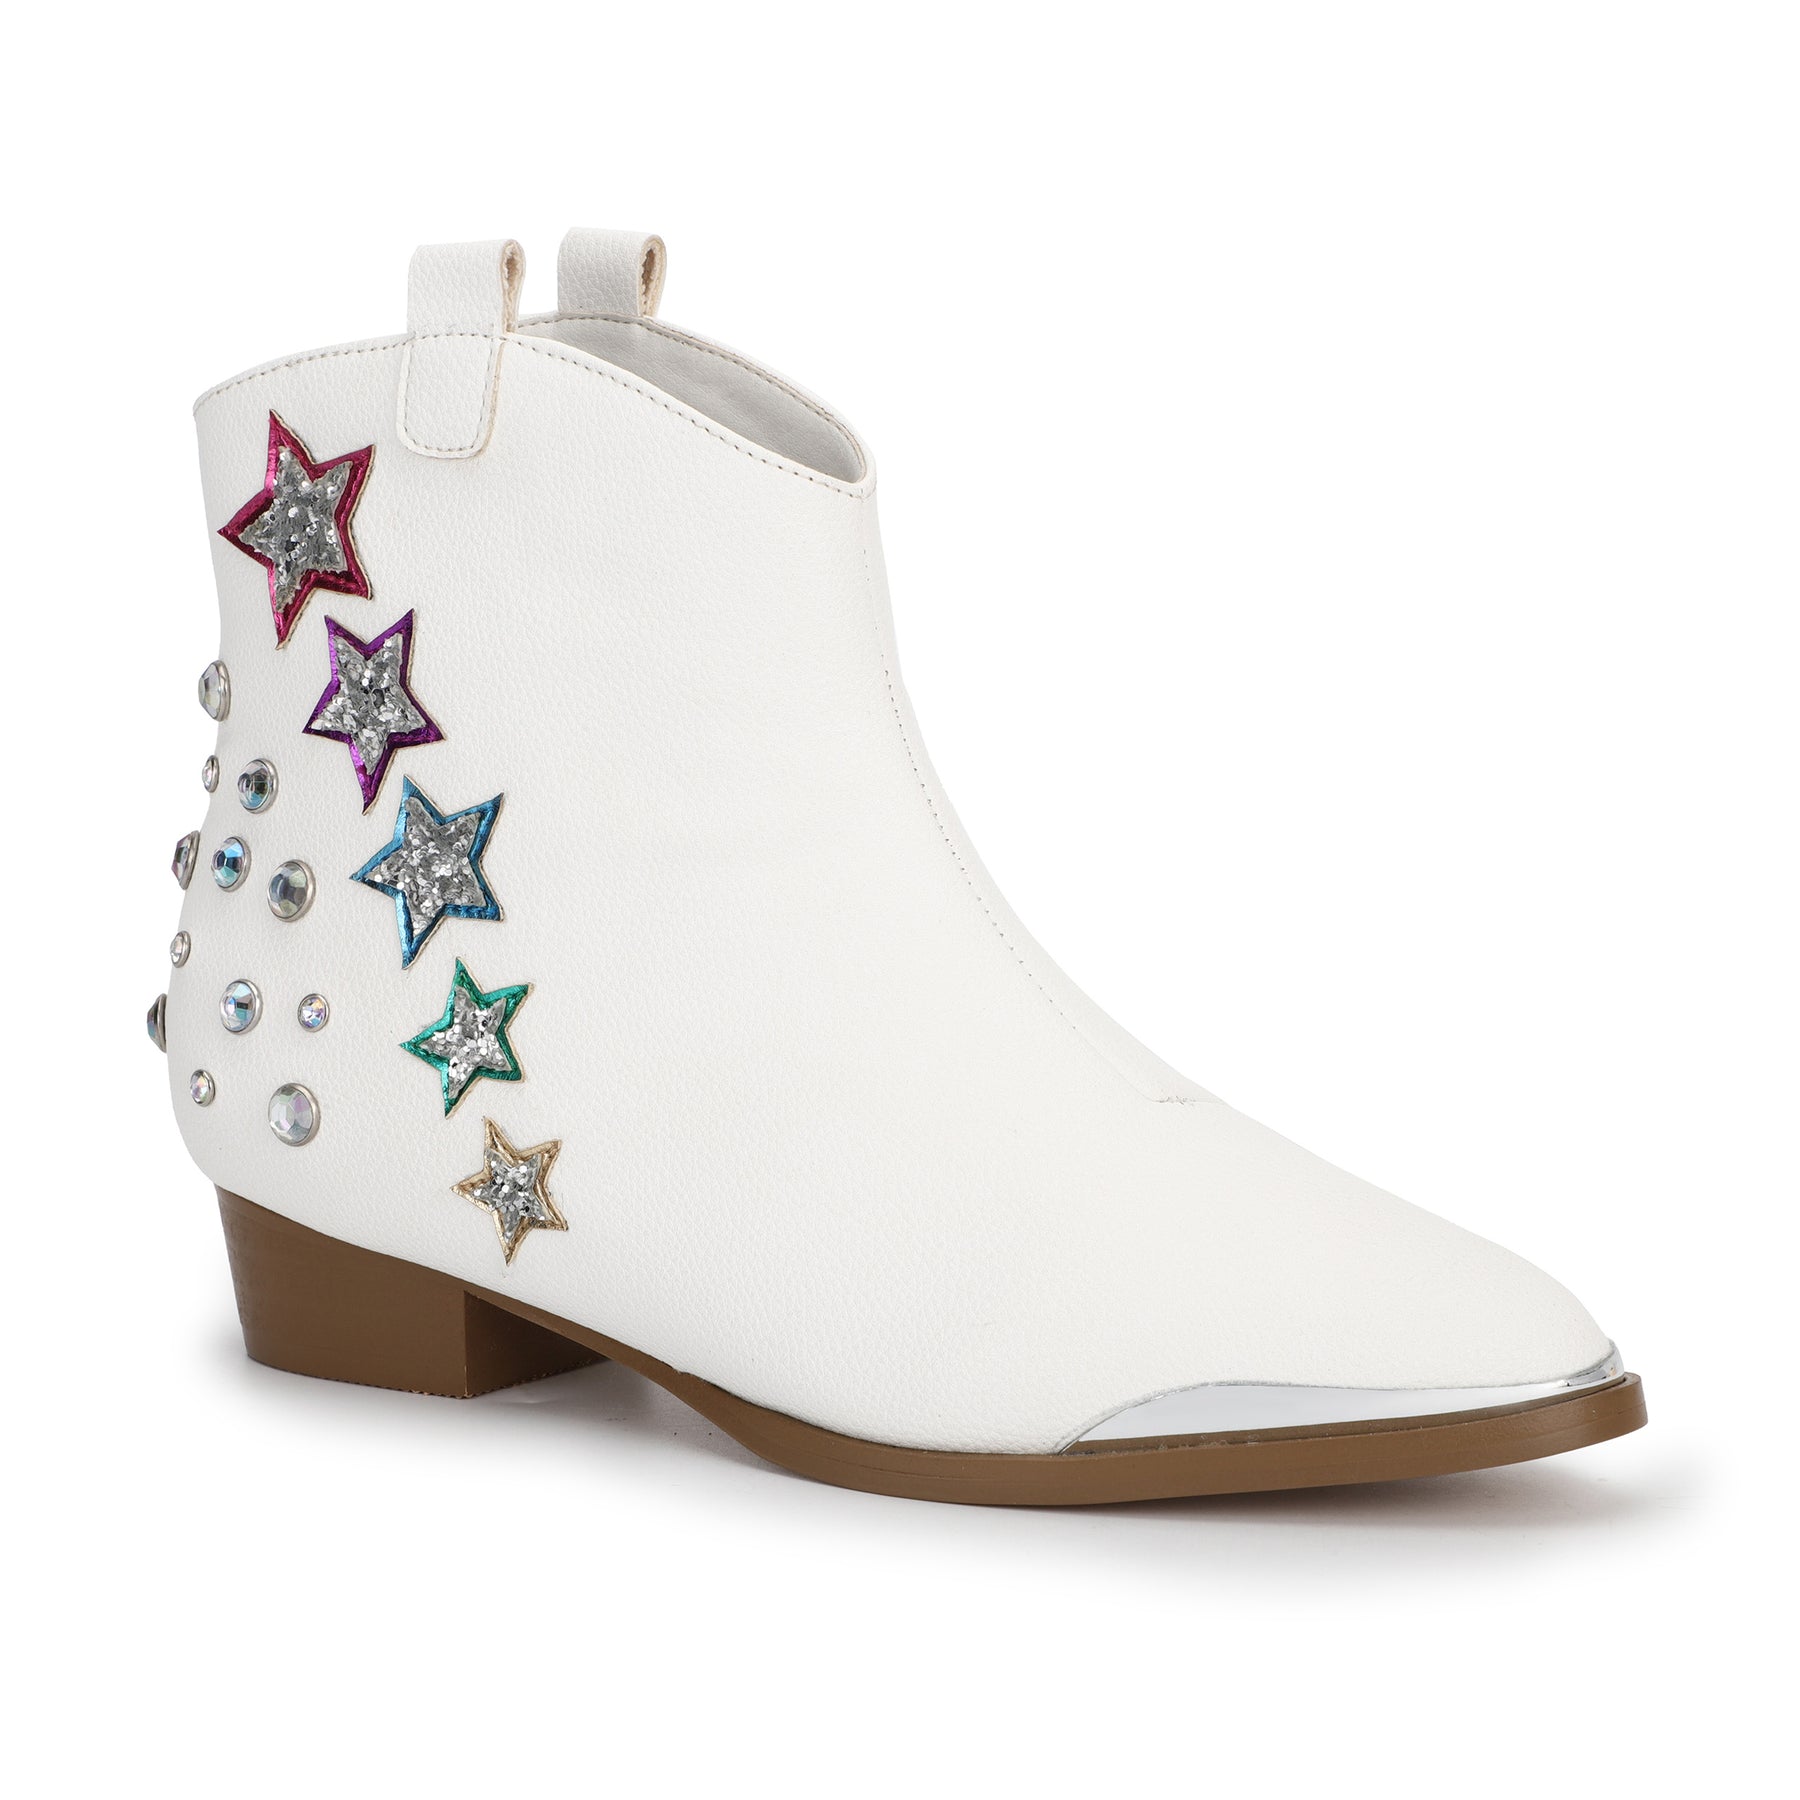 Miss Dallas Western Boot in White Shooting Stars - Kids